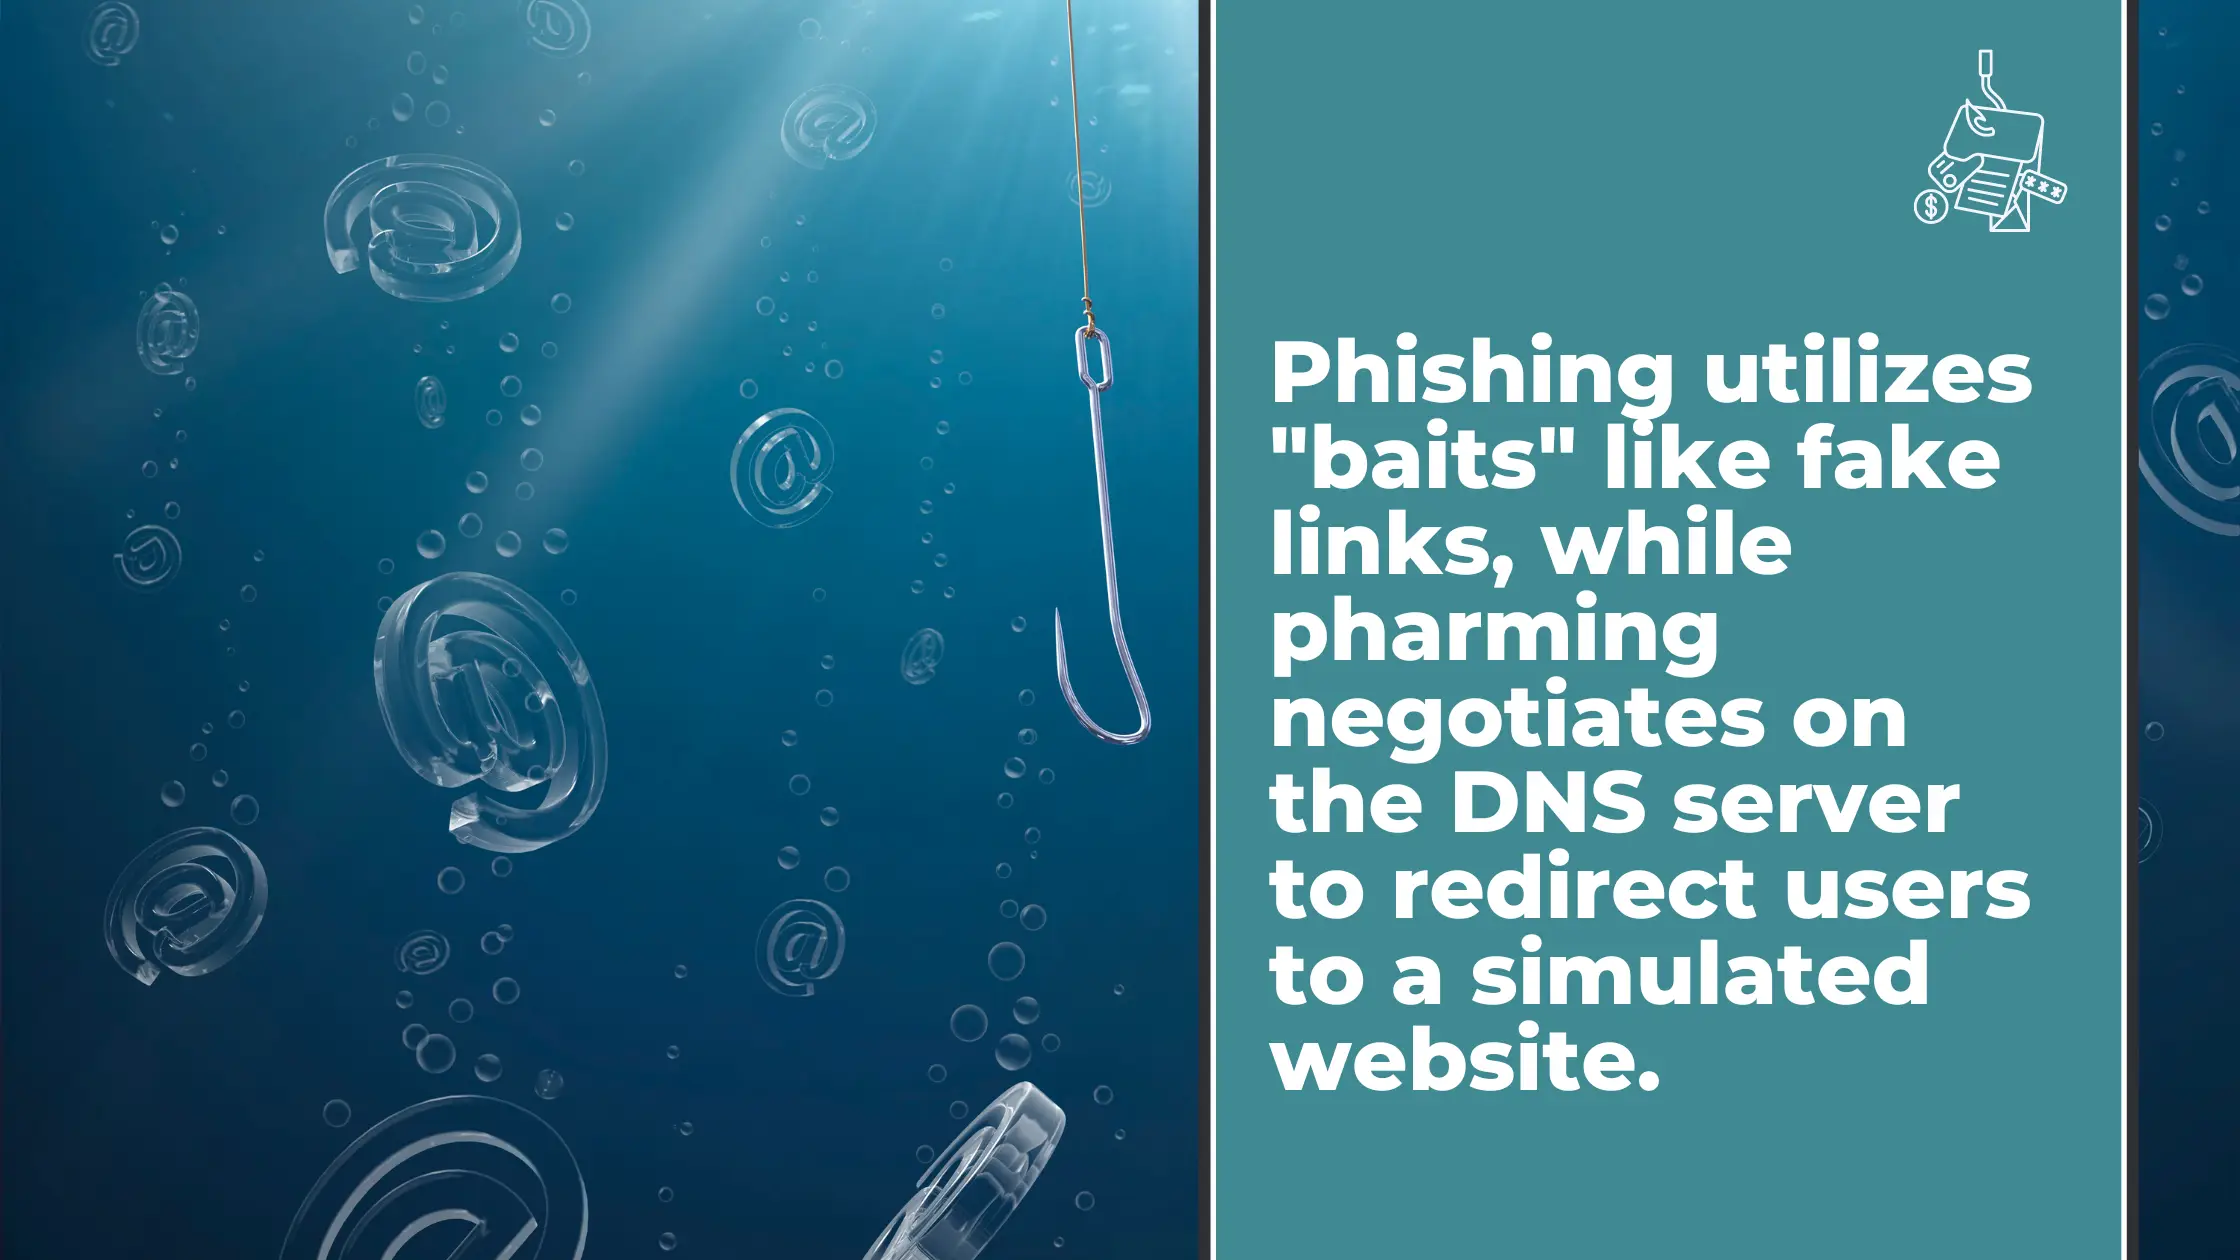 difference between phishing and pharming?